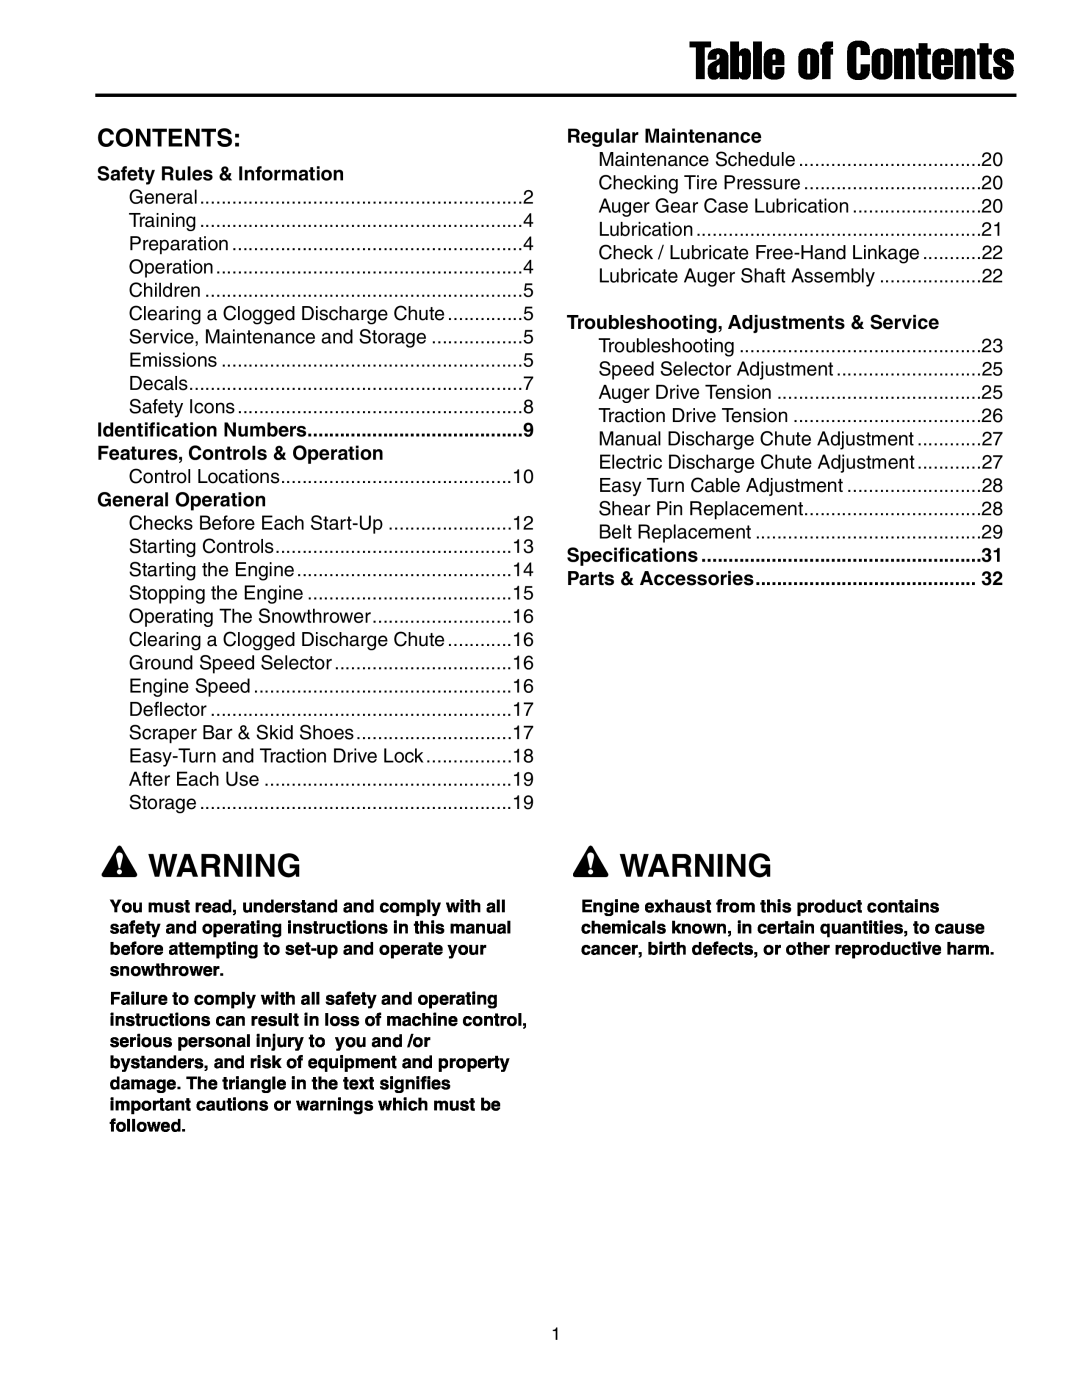 Briggs & Stratton 1524 Table of Contents, Safety Rules & Information, Features, Controls & Operation, Specifications 